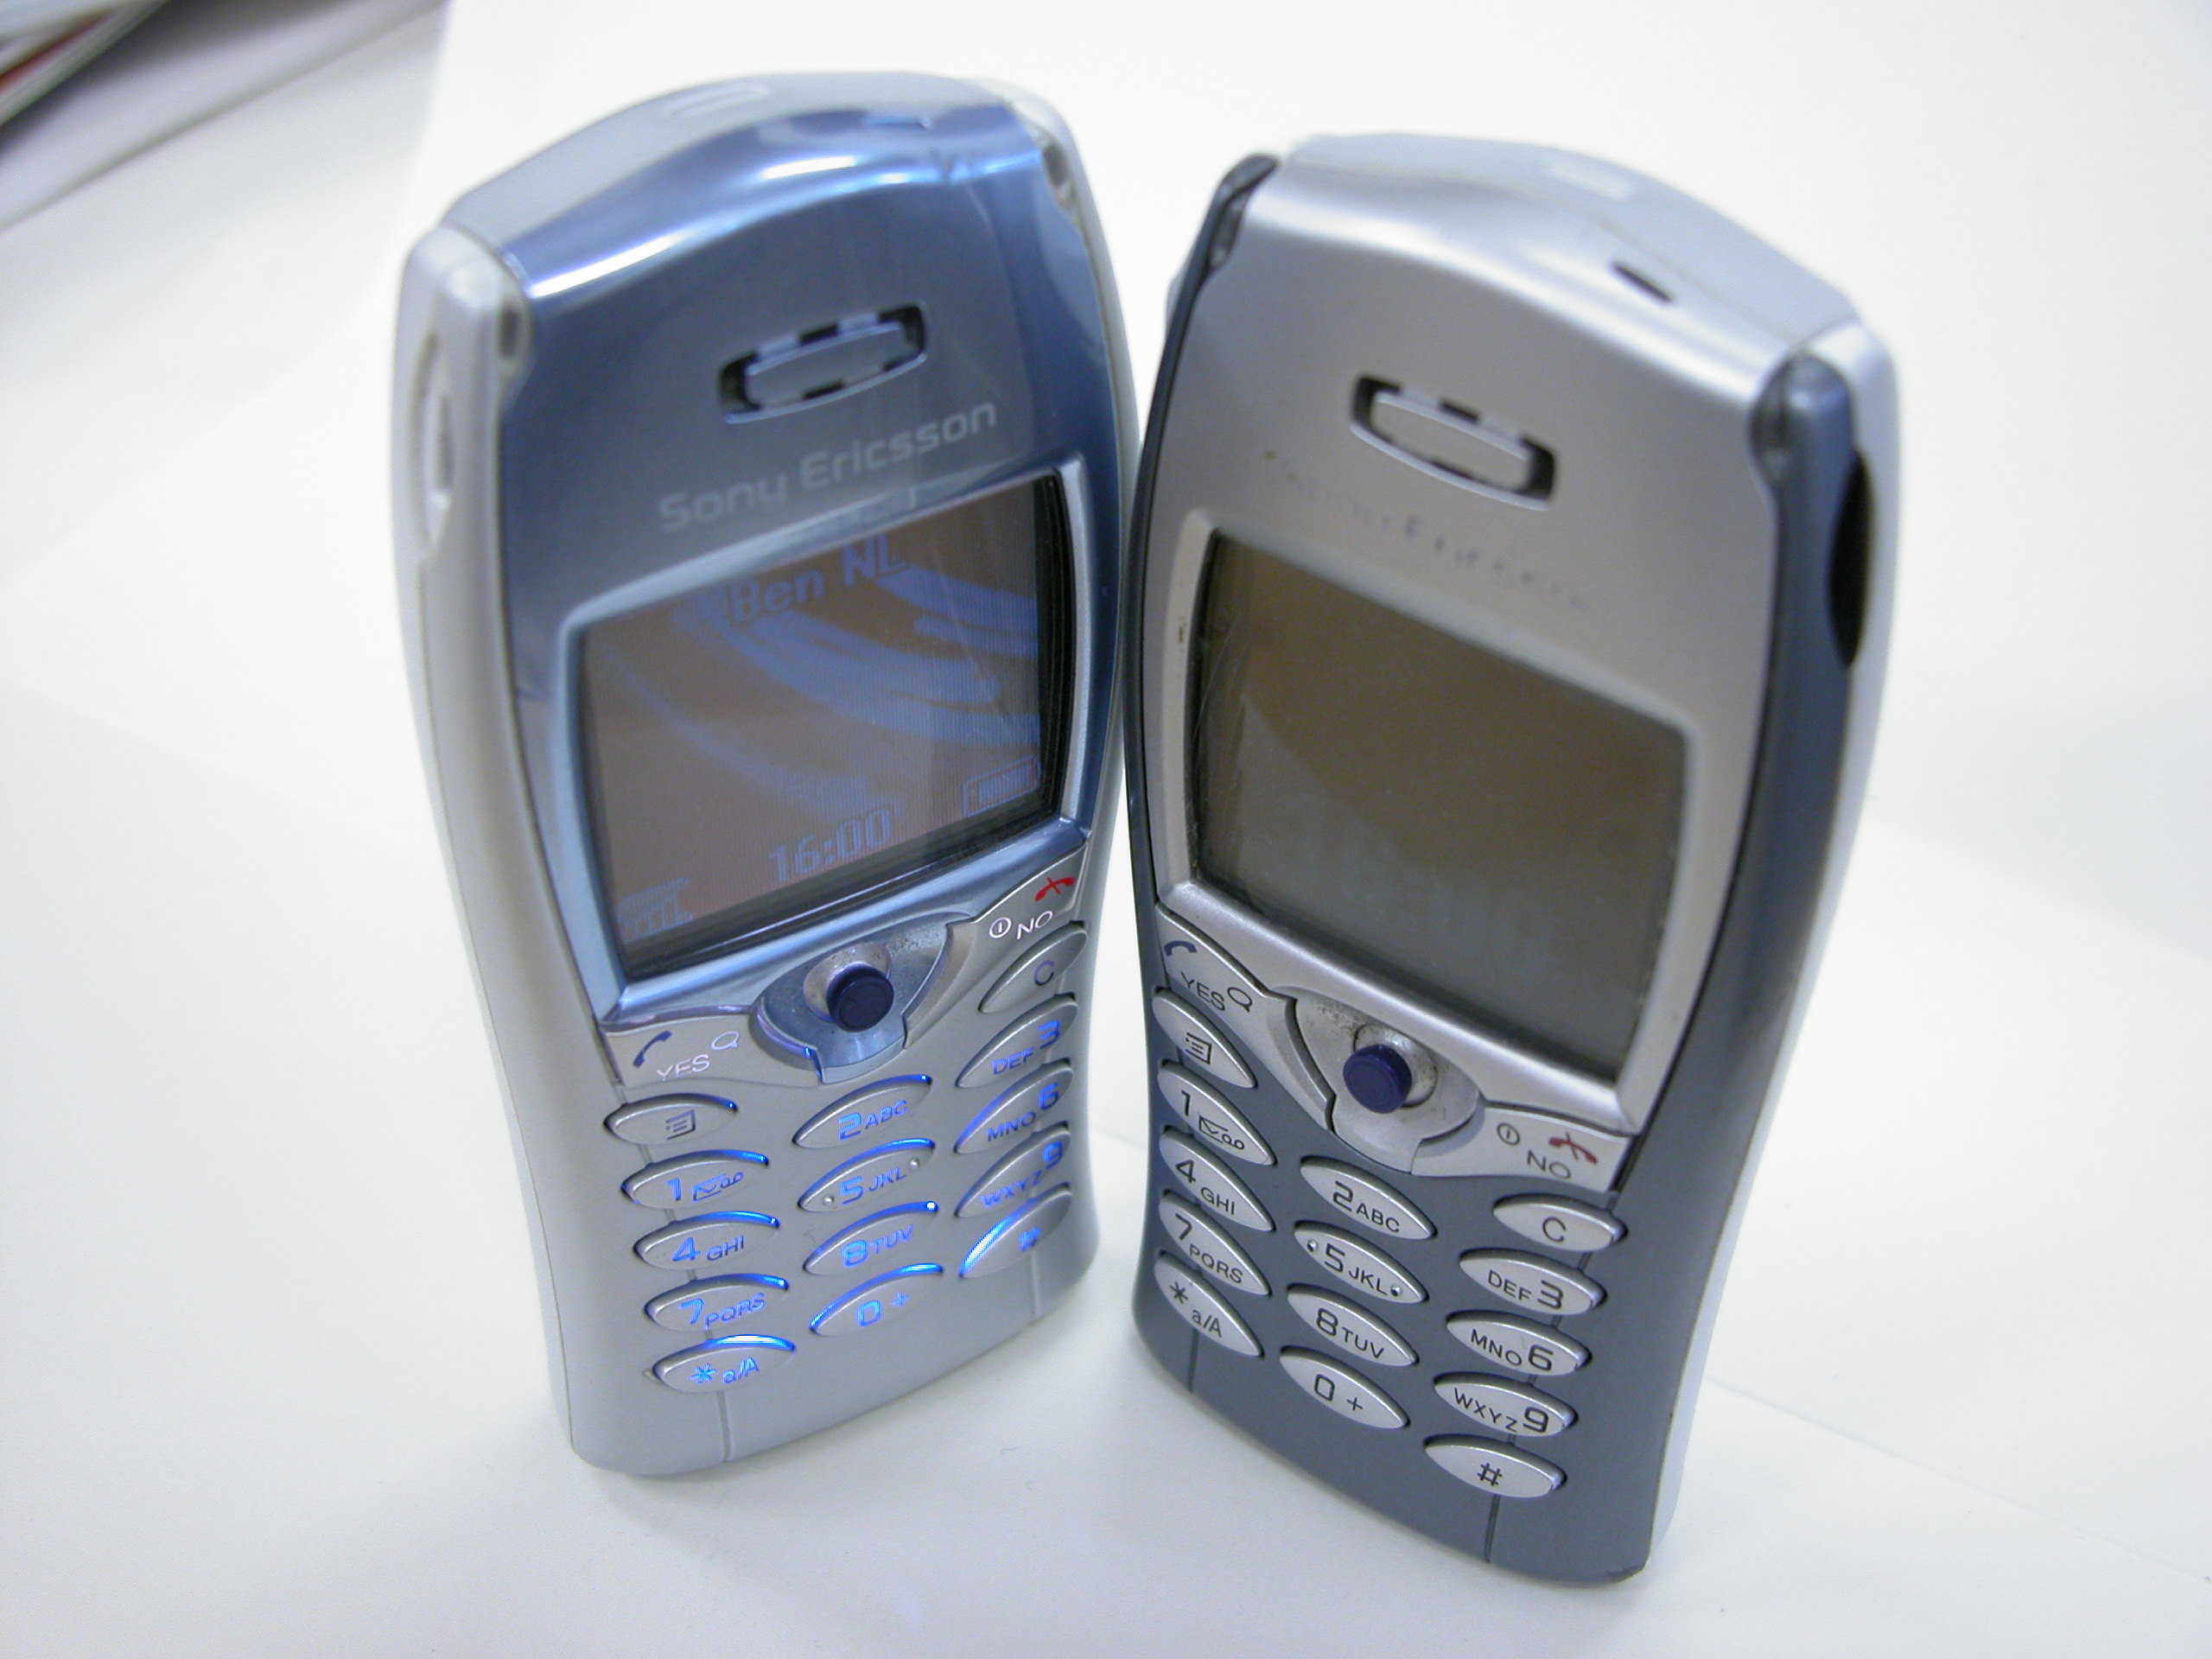 objects phone phones mobile mobiles mobilephones mobilephone telecom buttons sony ericsson sonyericsson contact product